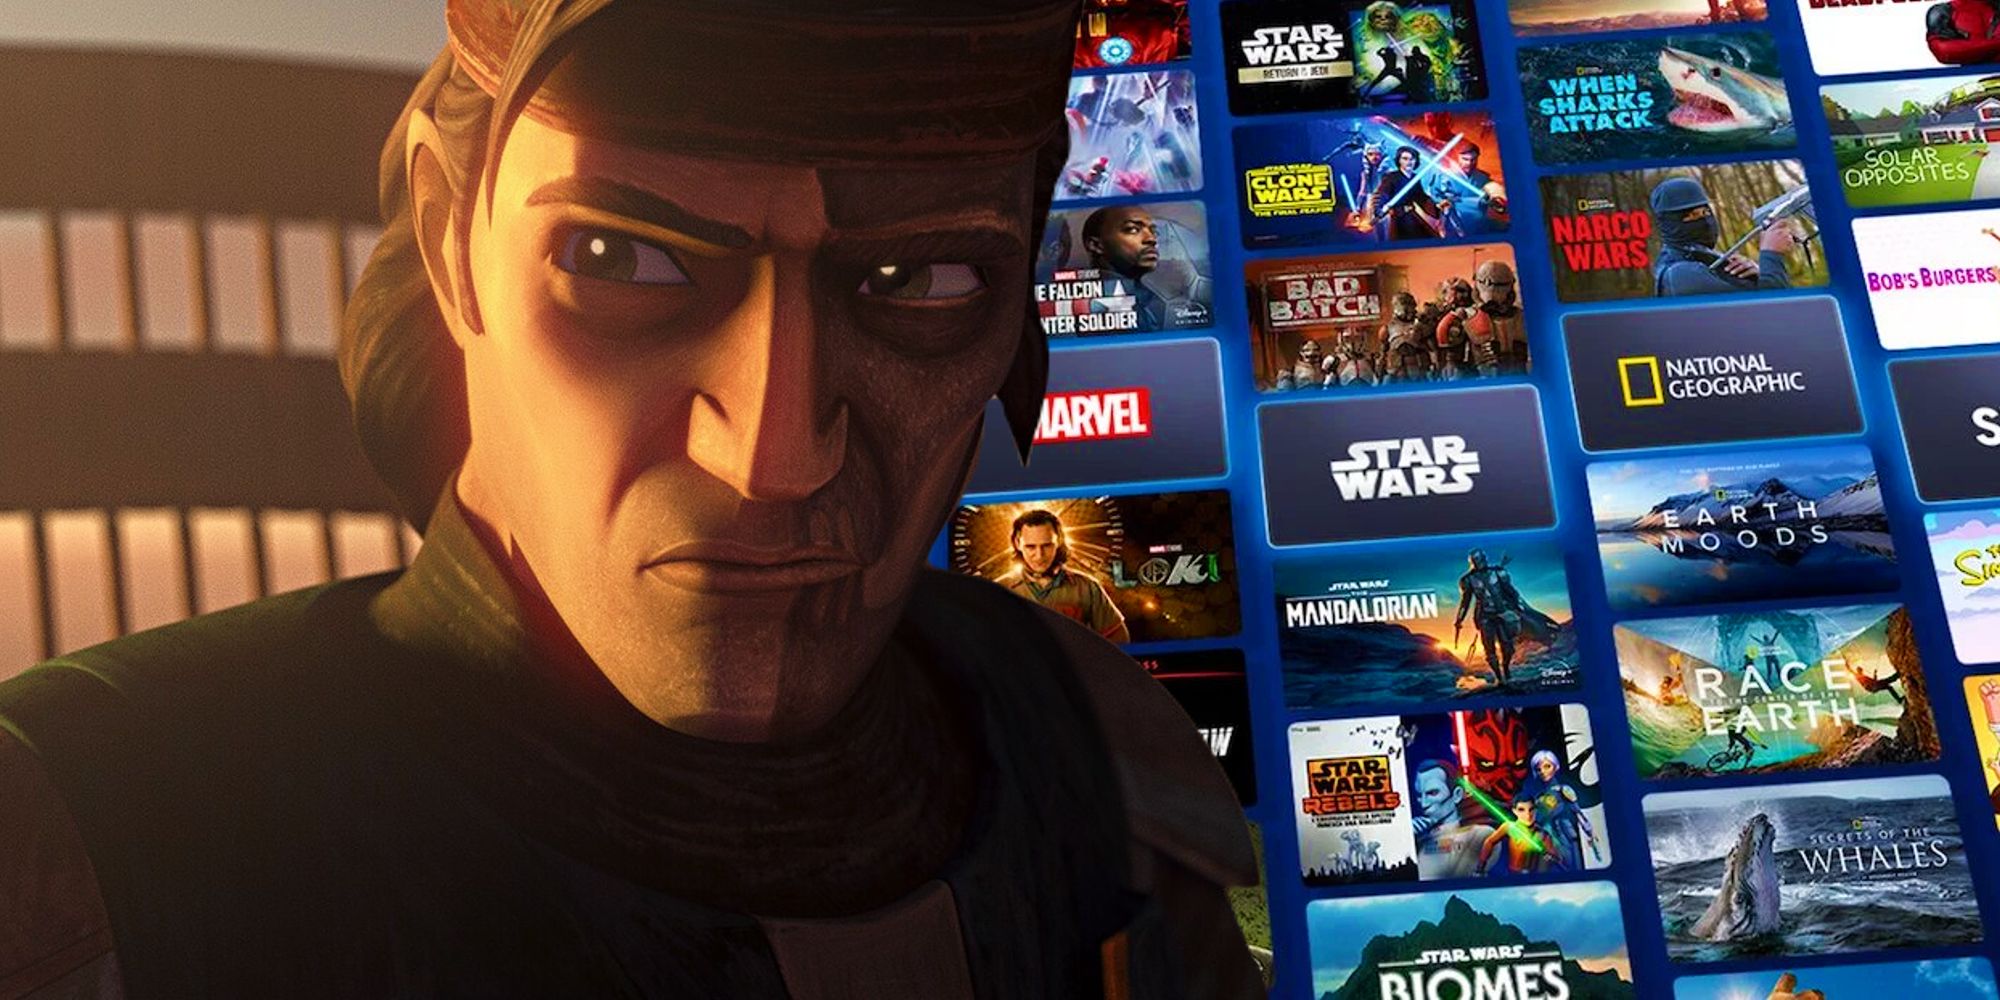 Hunter looking angry in Star Wars: The Bad Batch next to an image of the Disney+ home page